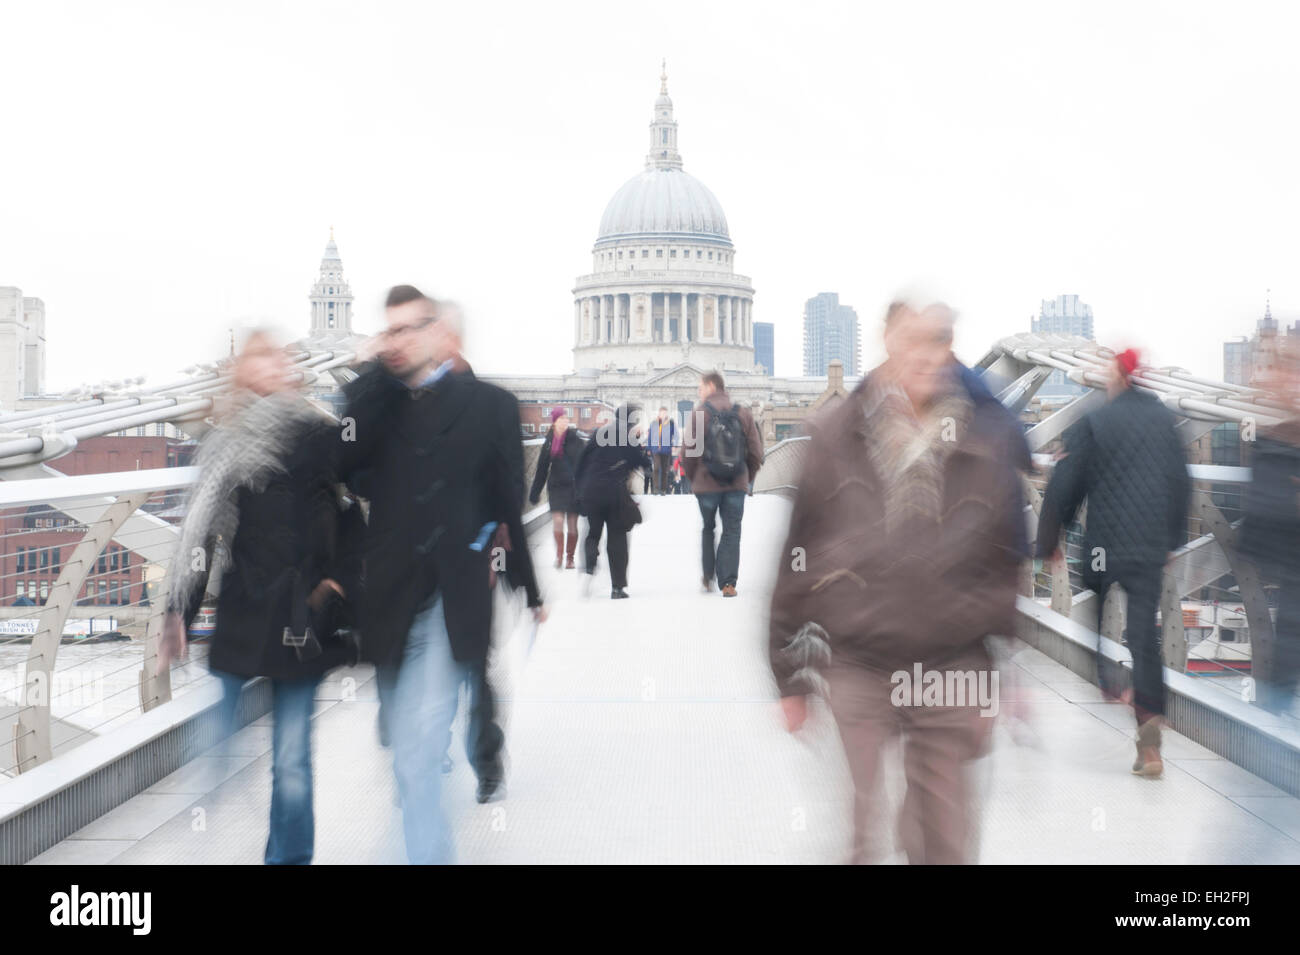 London, Motion blur of people walking across Millennium Bridge with St Pauls Cathedral in the background Stock Photo